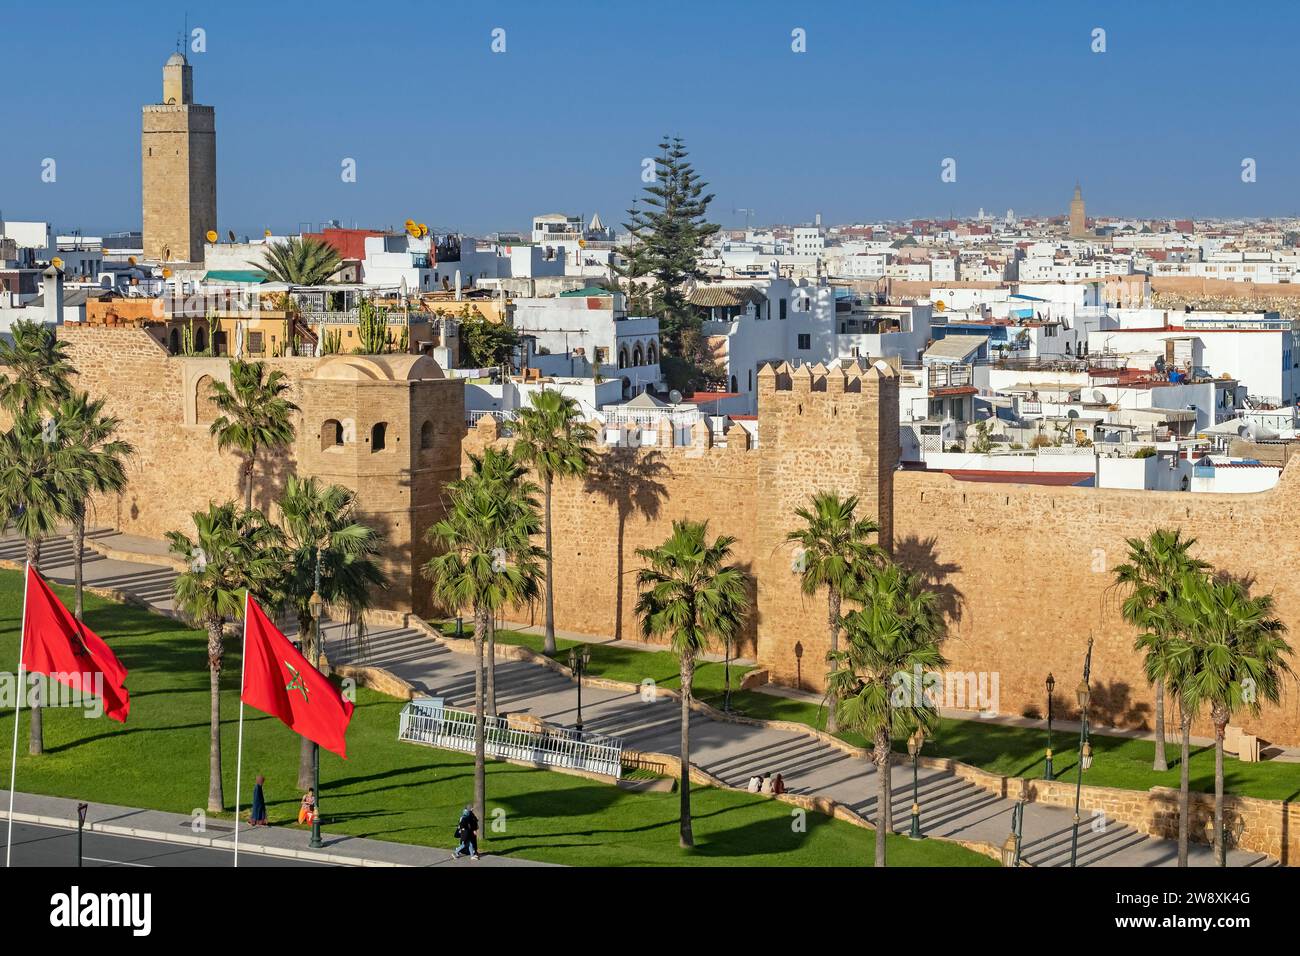 City walls of the Kasbah of the Udayas / Oudaias and Minaret of the Old Mosque in the capital Rabat at sunset, Rabat-Salé-Kénitra, Morocco Stock Photo